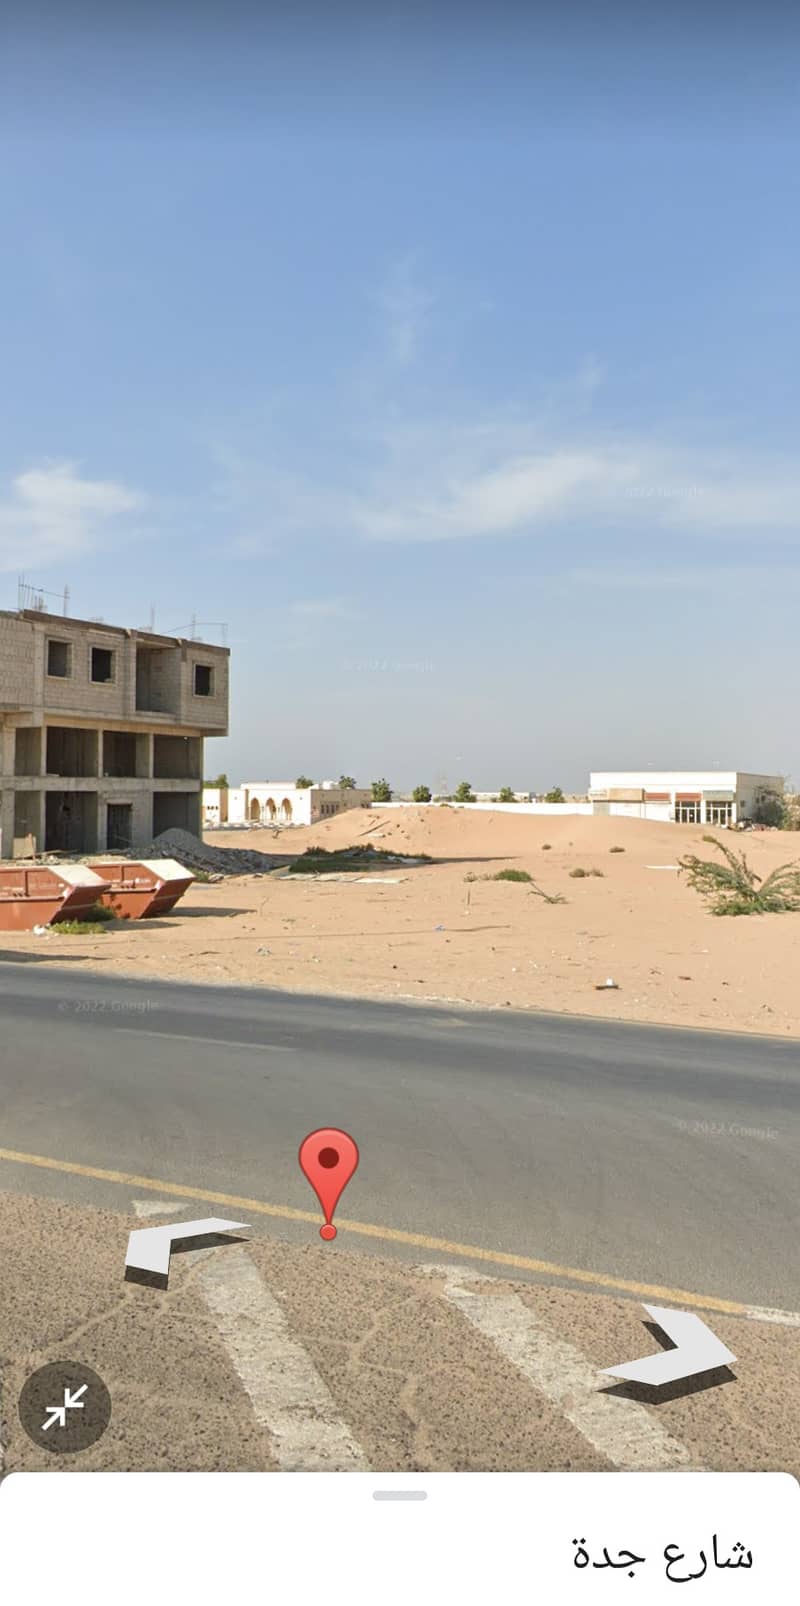 Commercial land for sale in Ajman, Al Jurf Industrial Area 2, Jeddah Street, on the main street, the land is on the corner of 3 streets, very close to the China mall, G+2

Area = 9040 square feet

The location is very excellent, close to Sheikh Mohammed b